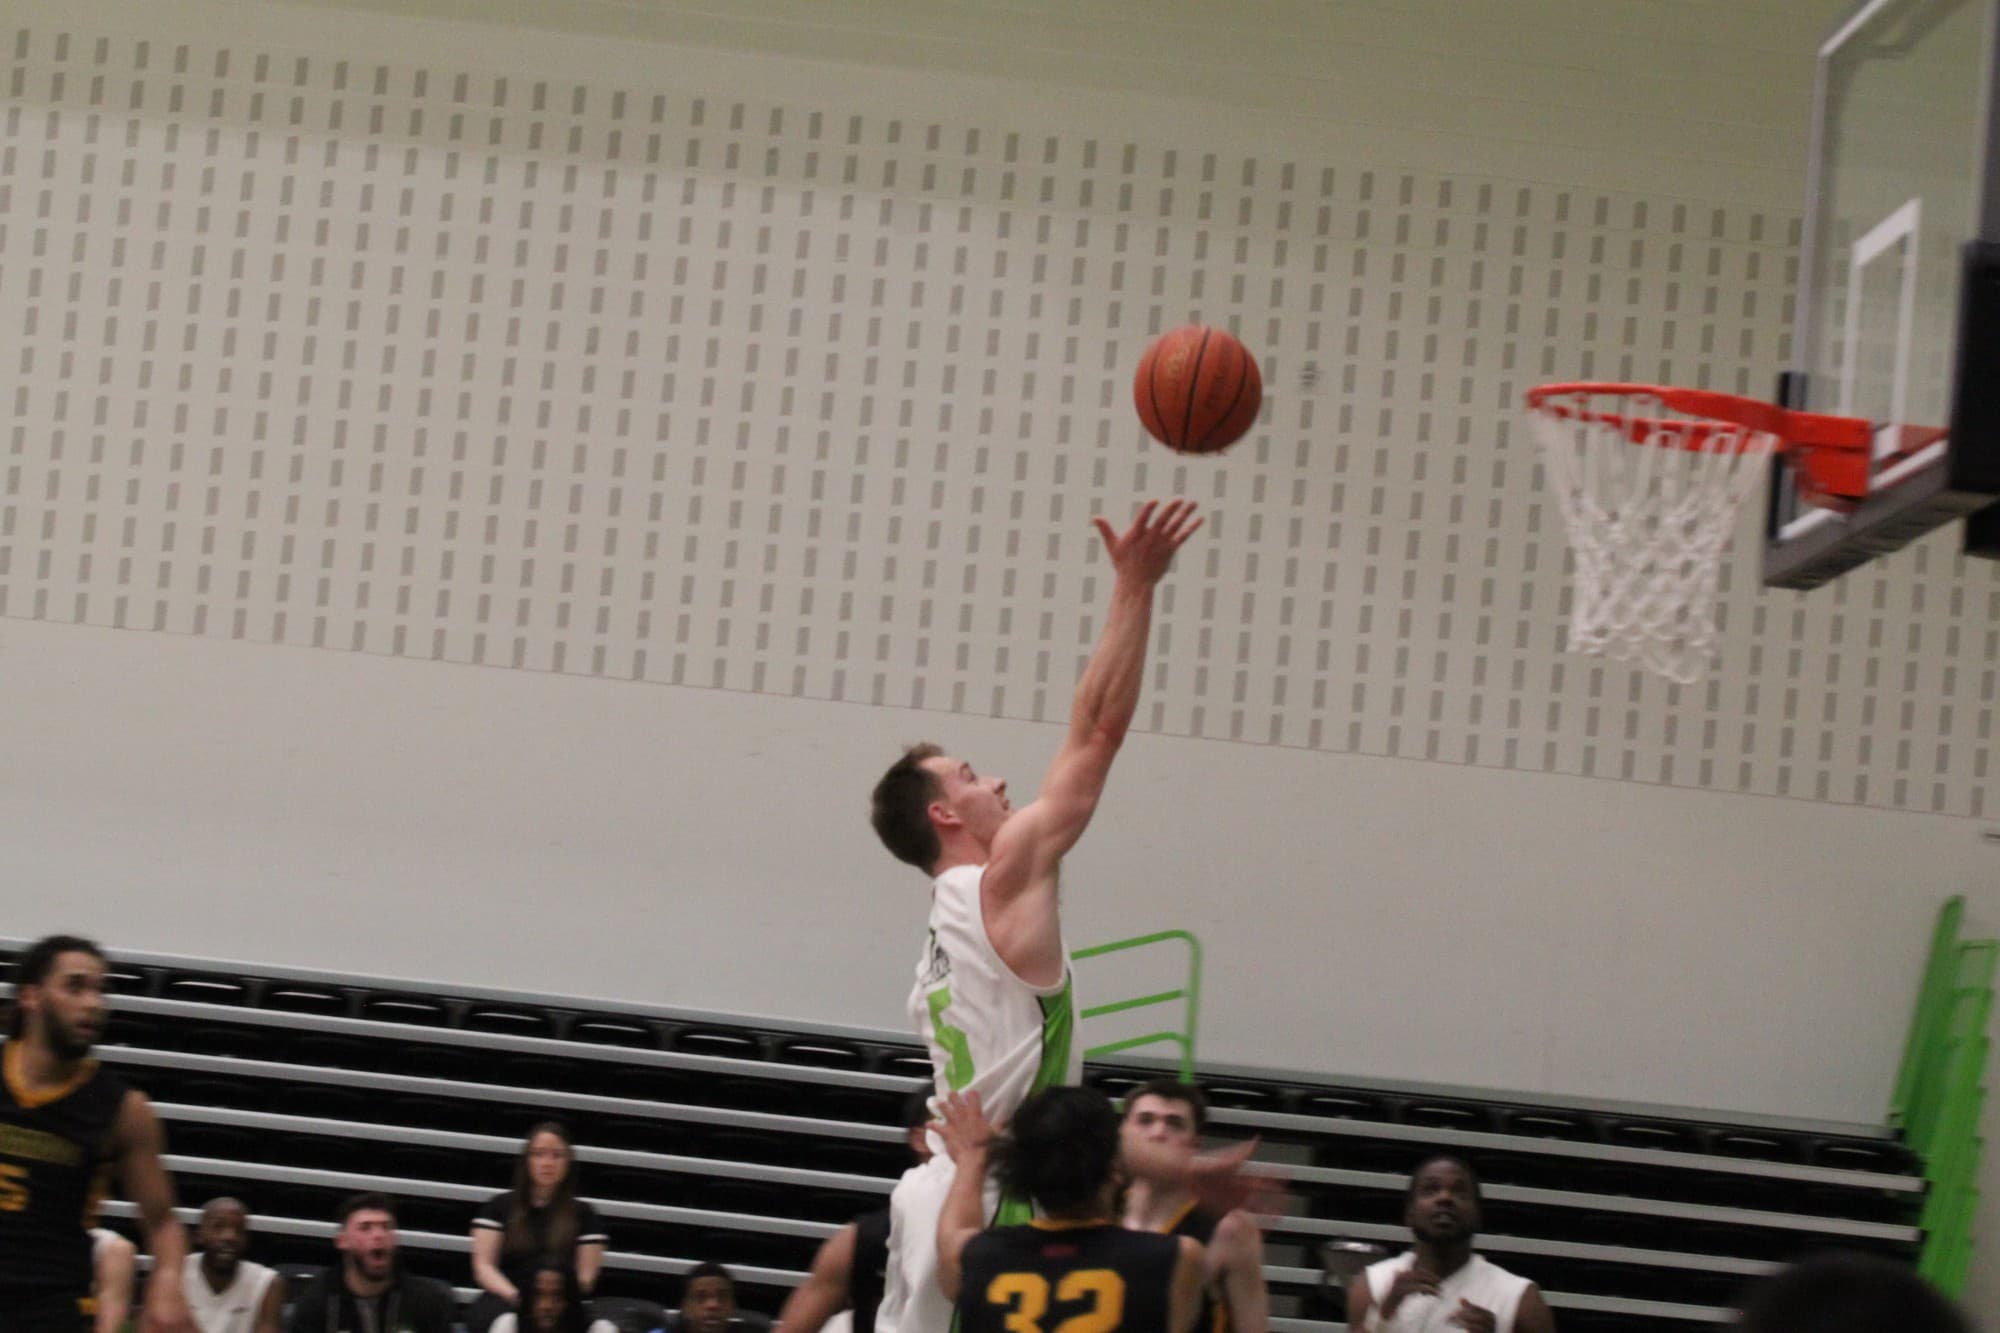 Chris Lachapelle drives to the basket in efforts to put in a lay up for the Wolves.